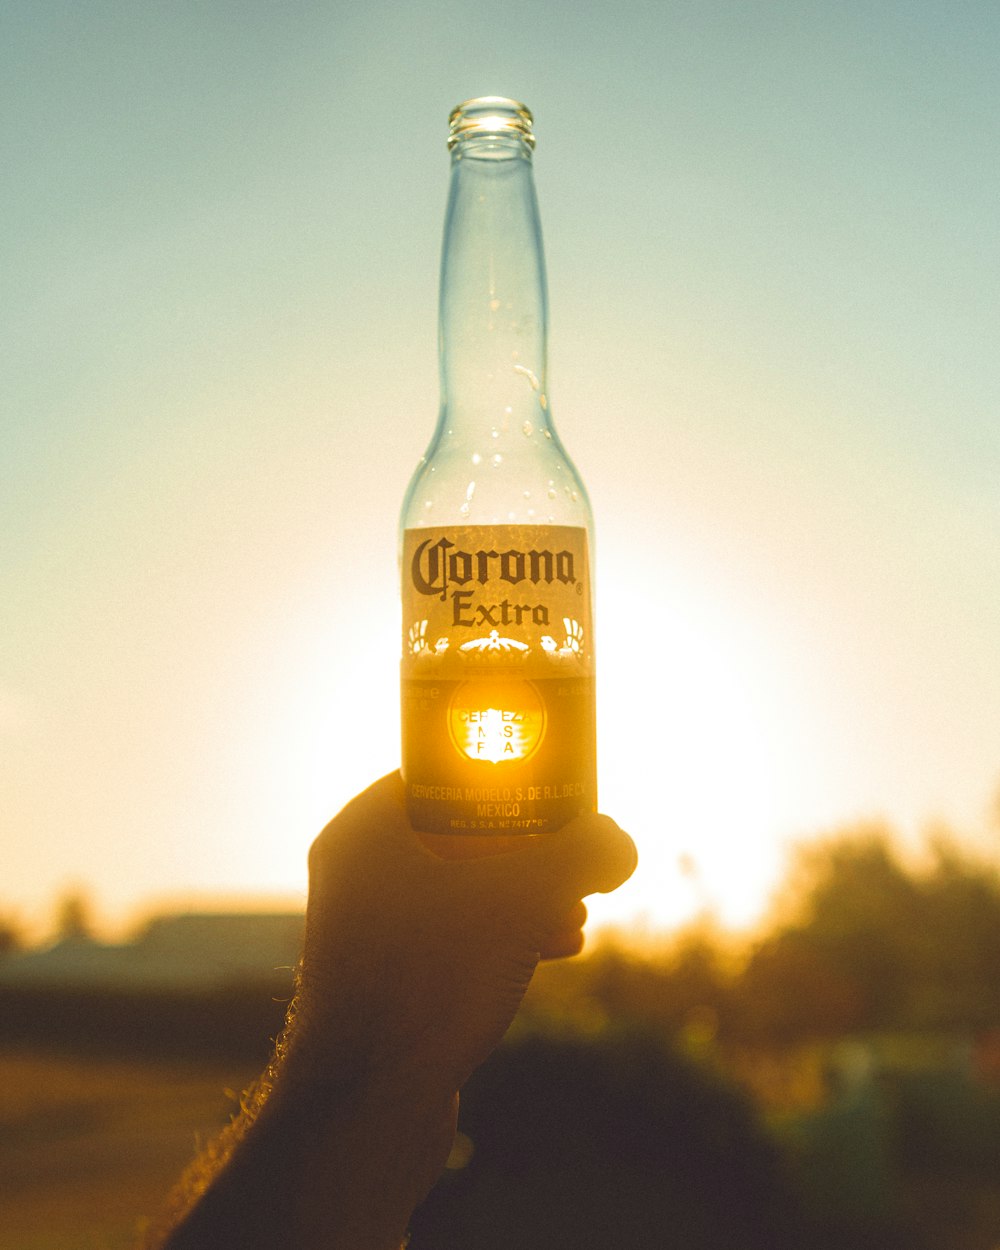 person holding corona extra beer bottle